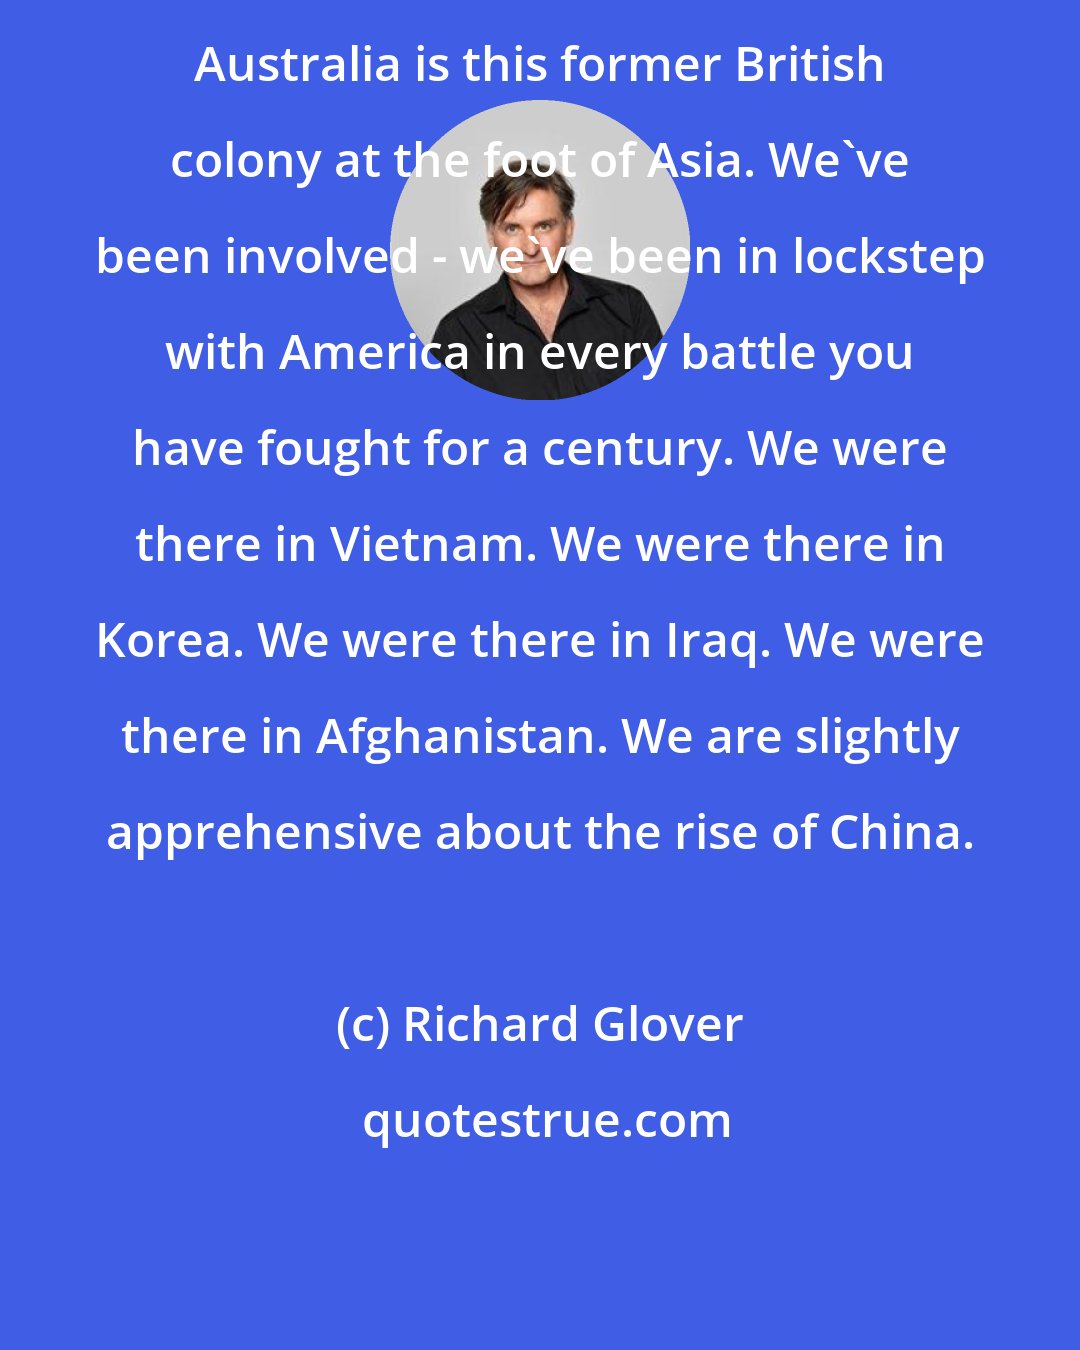 Richard Glover: Australia is this former British colony at the foot of Asia. We've been involved - we've been in lockstep with America in every battle you have fought for a century. We were there in Vietnam. We were there in Korea. We were there in Iraq. We were there in Afghanistan. We are slightly apprehensive about the rise of China.